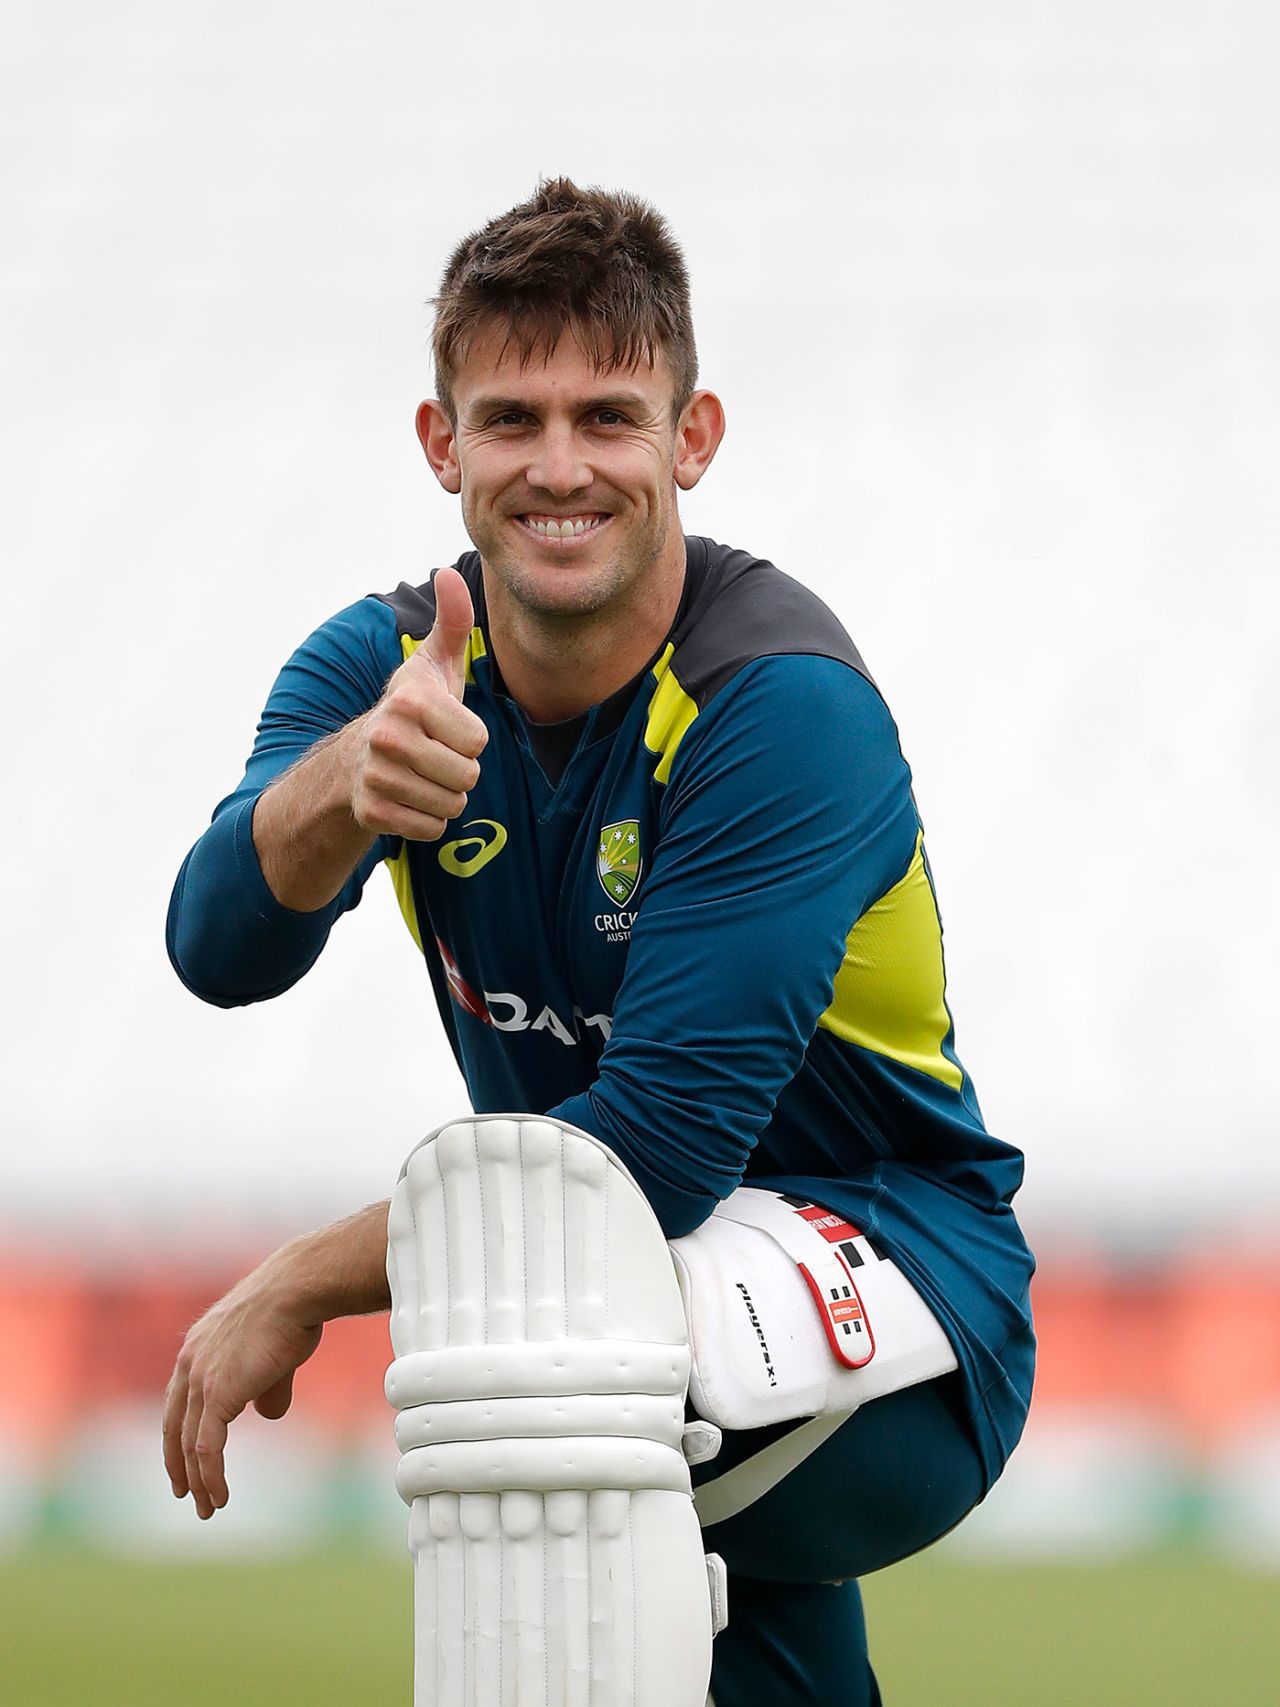 Mitchell Marsh pads up ahead of the Oval Test, England v Australia, 5th Test, The Oval, September 11, 2019